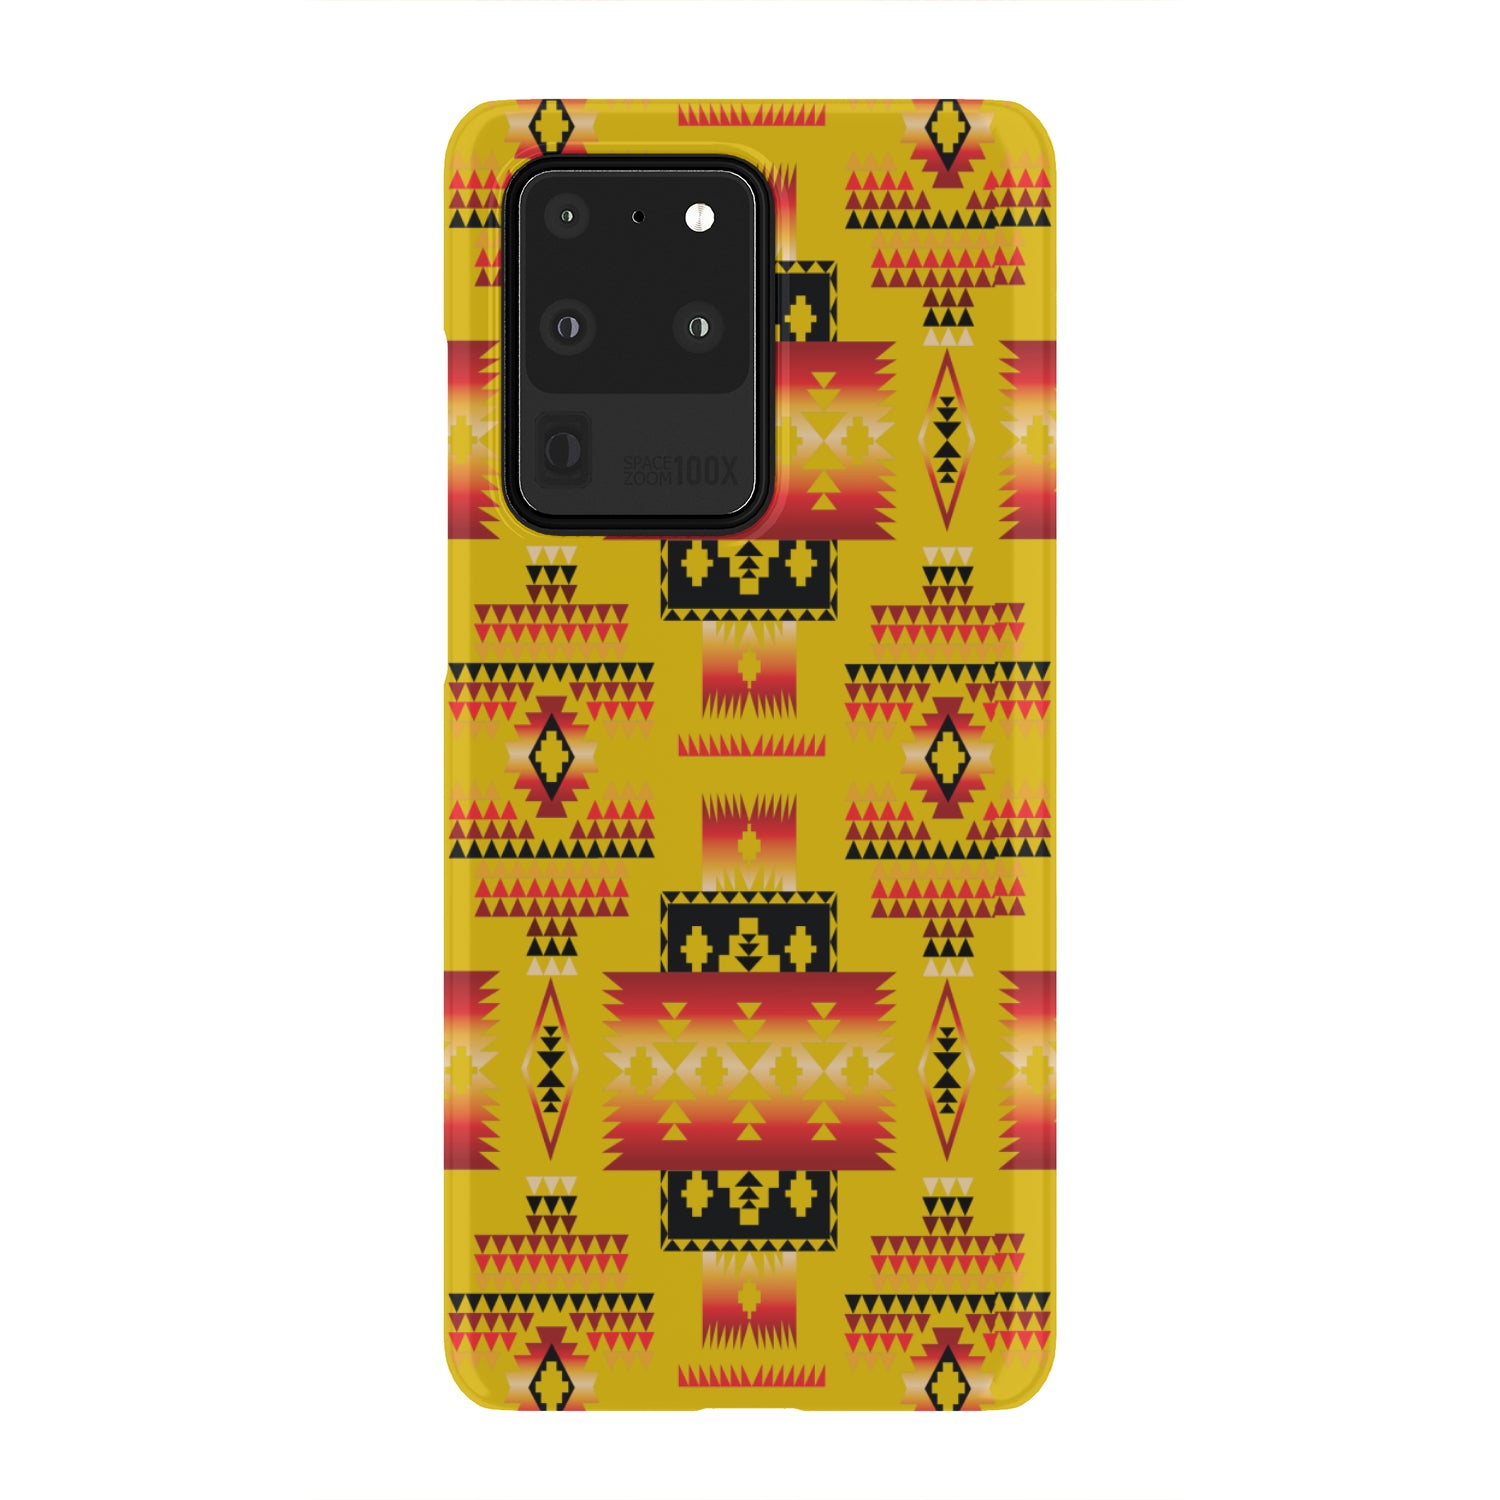 Powwow Store gb nat00302 02 yellow tribes pattern native american phone case